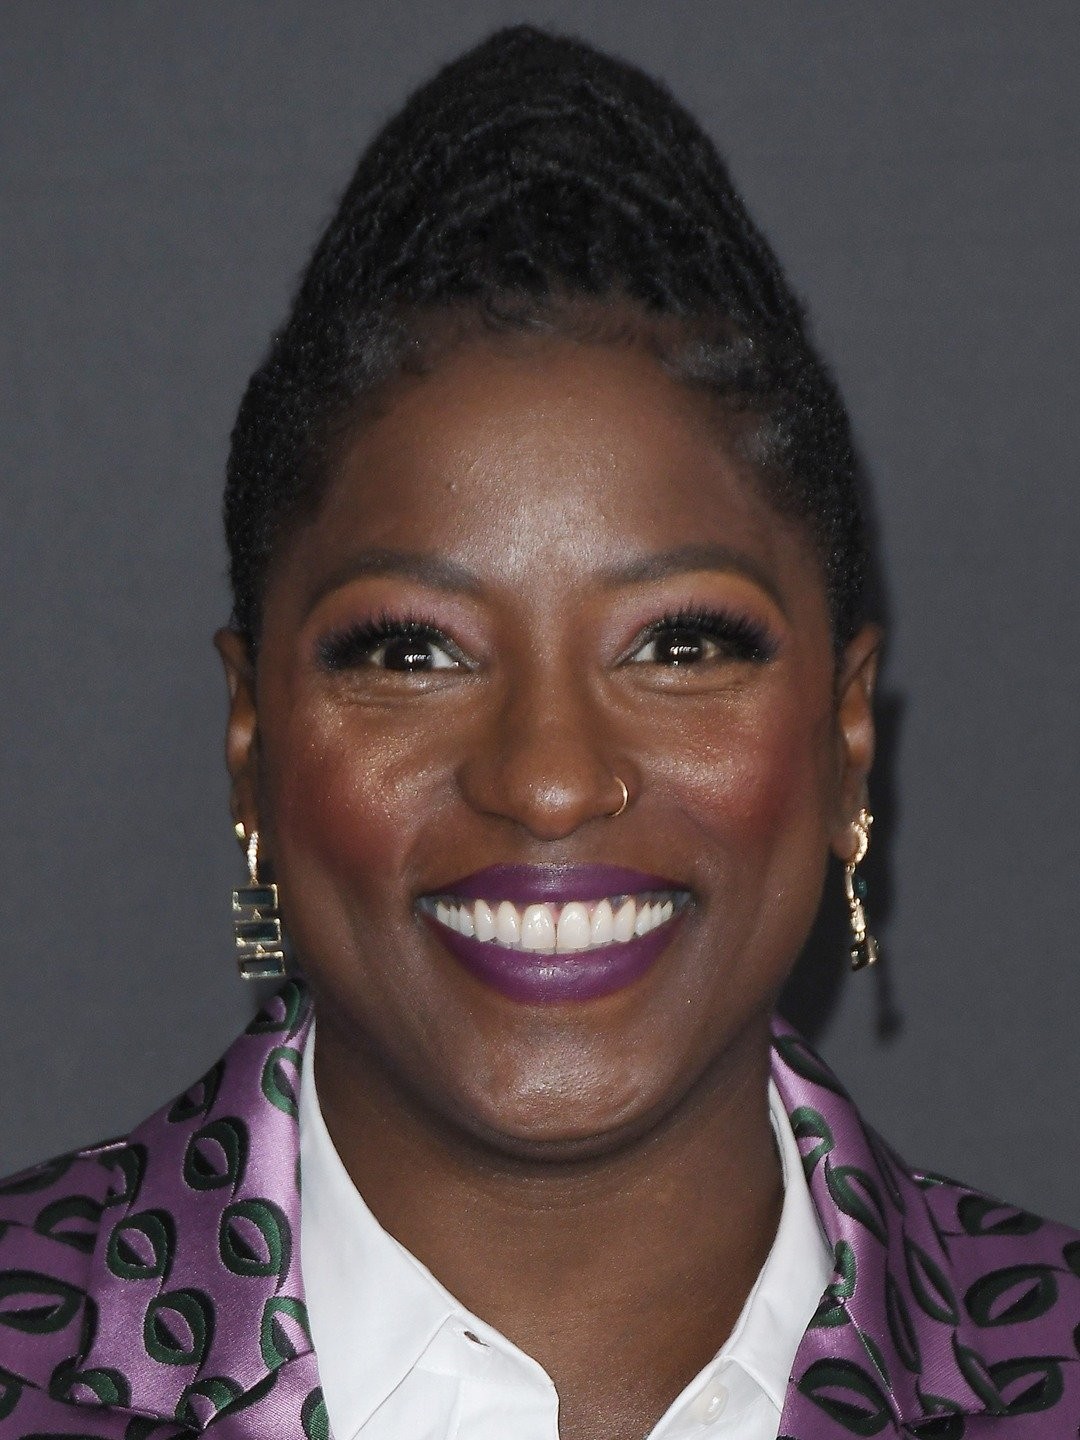 Rutina Wesley will portray Maria in The Last Of Us HBO show : r